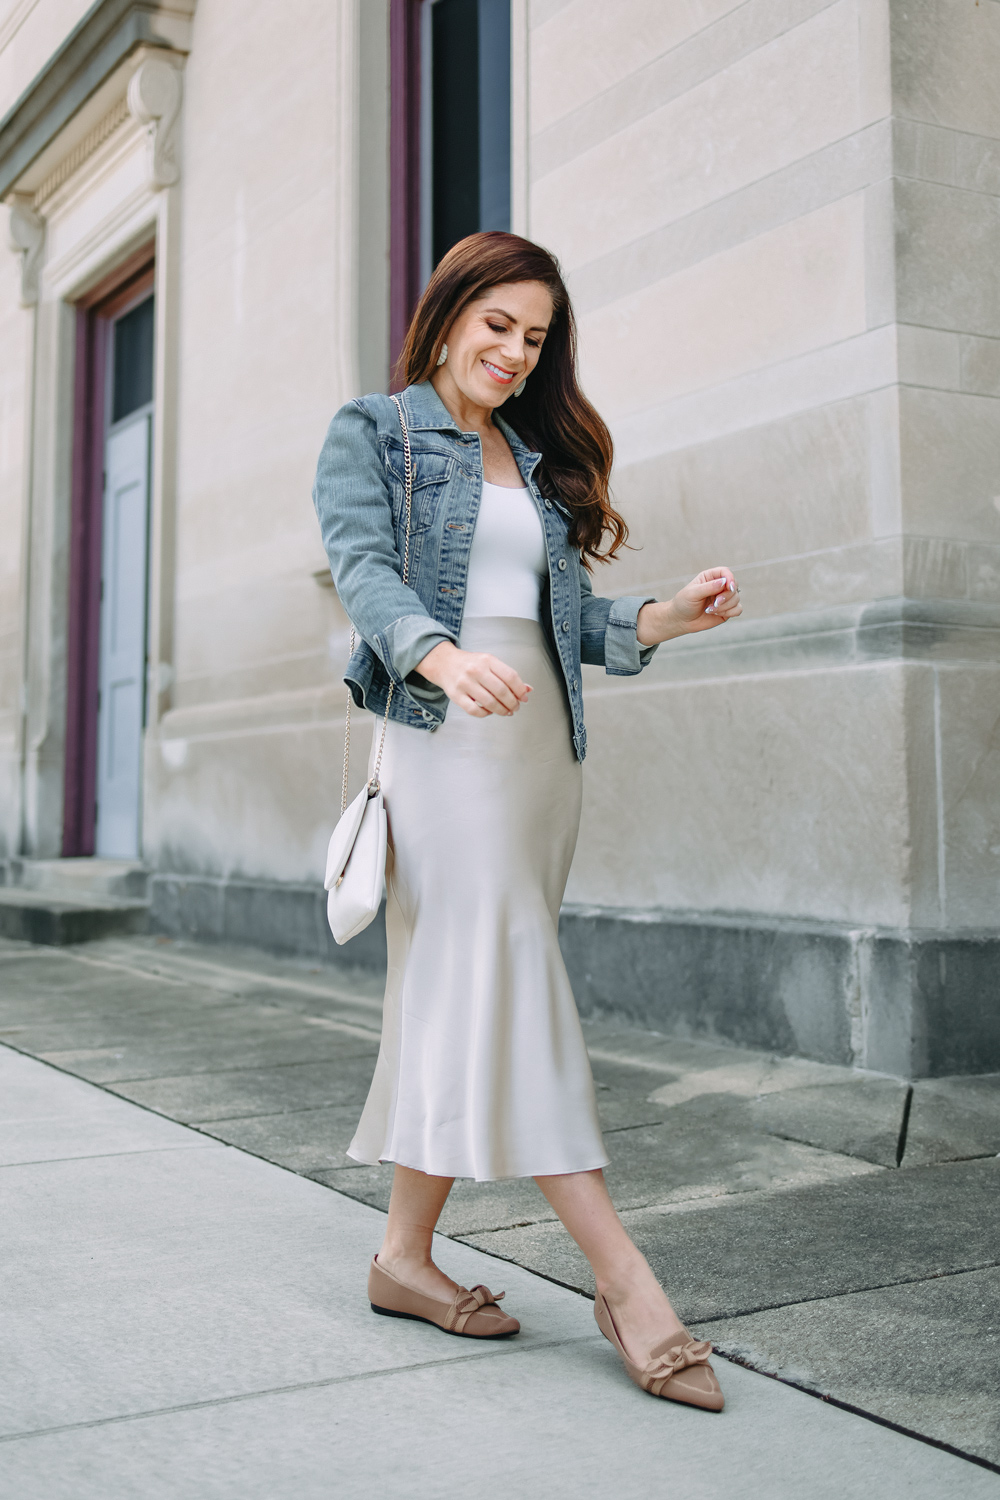 styling silk skirts for fall